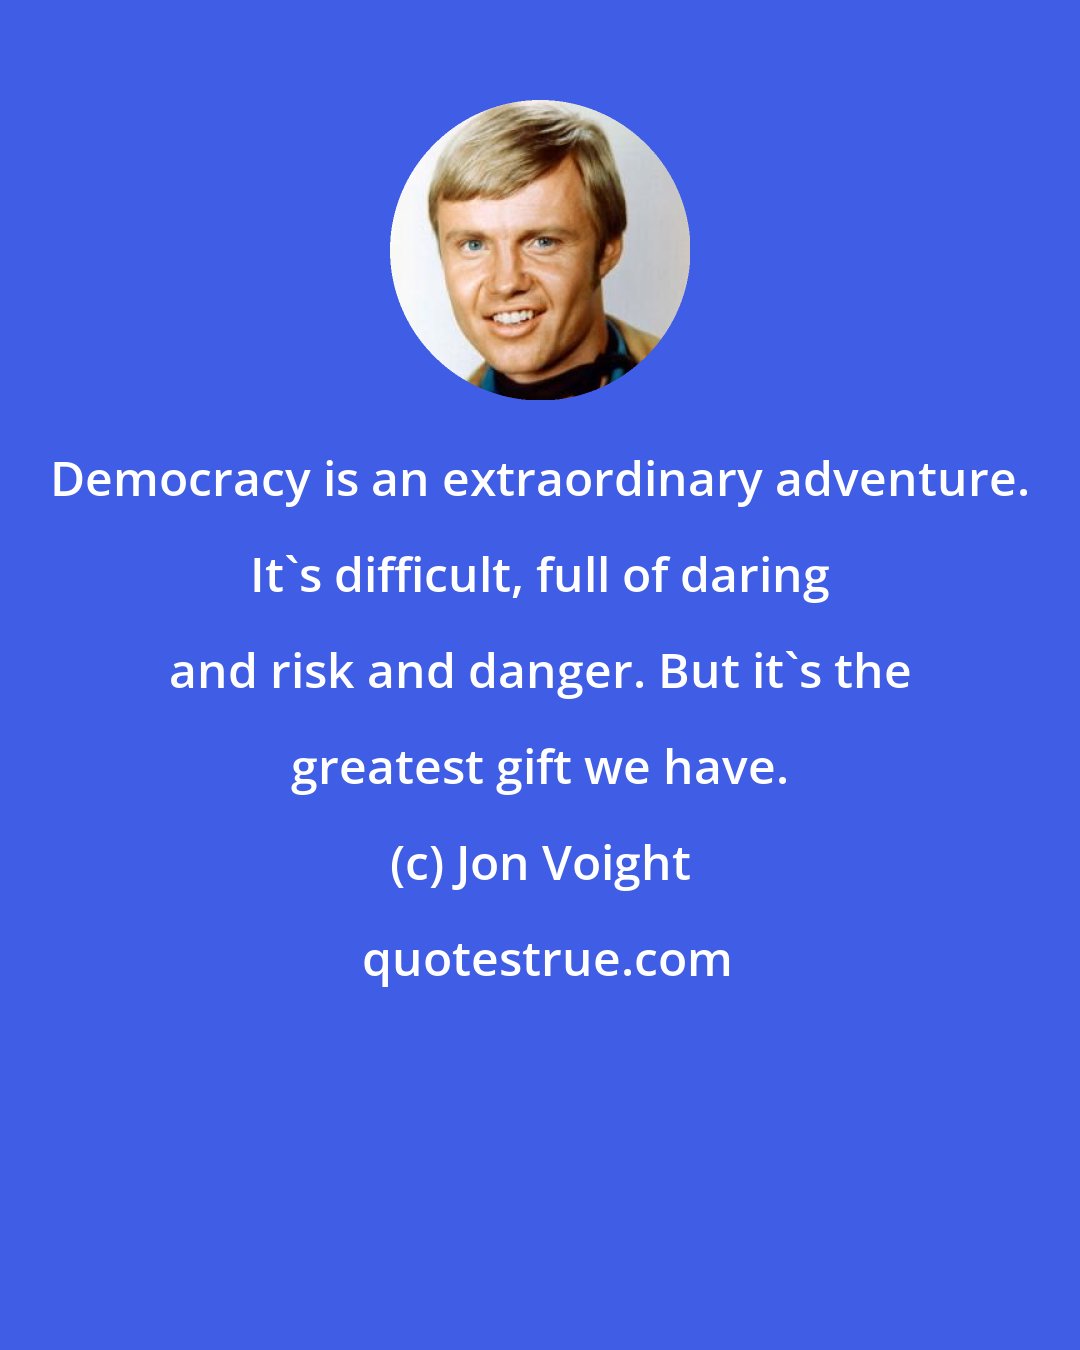 Jon Voight: Democracy is an extraordinary adventure. It's difficult, full of daring and risk and danger. But it's the greatest gift we have.